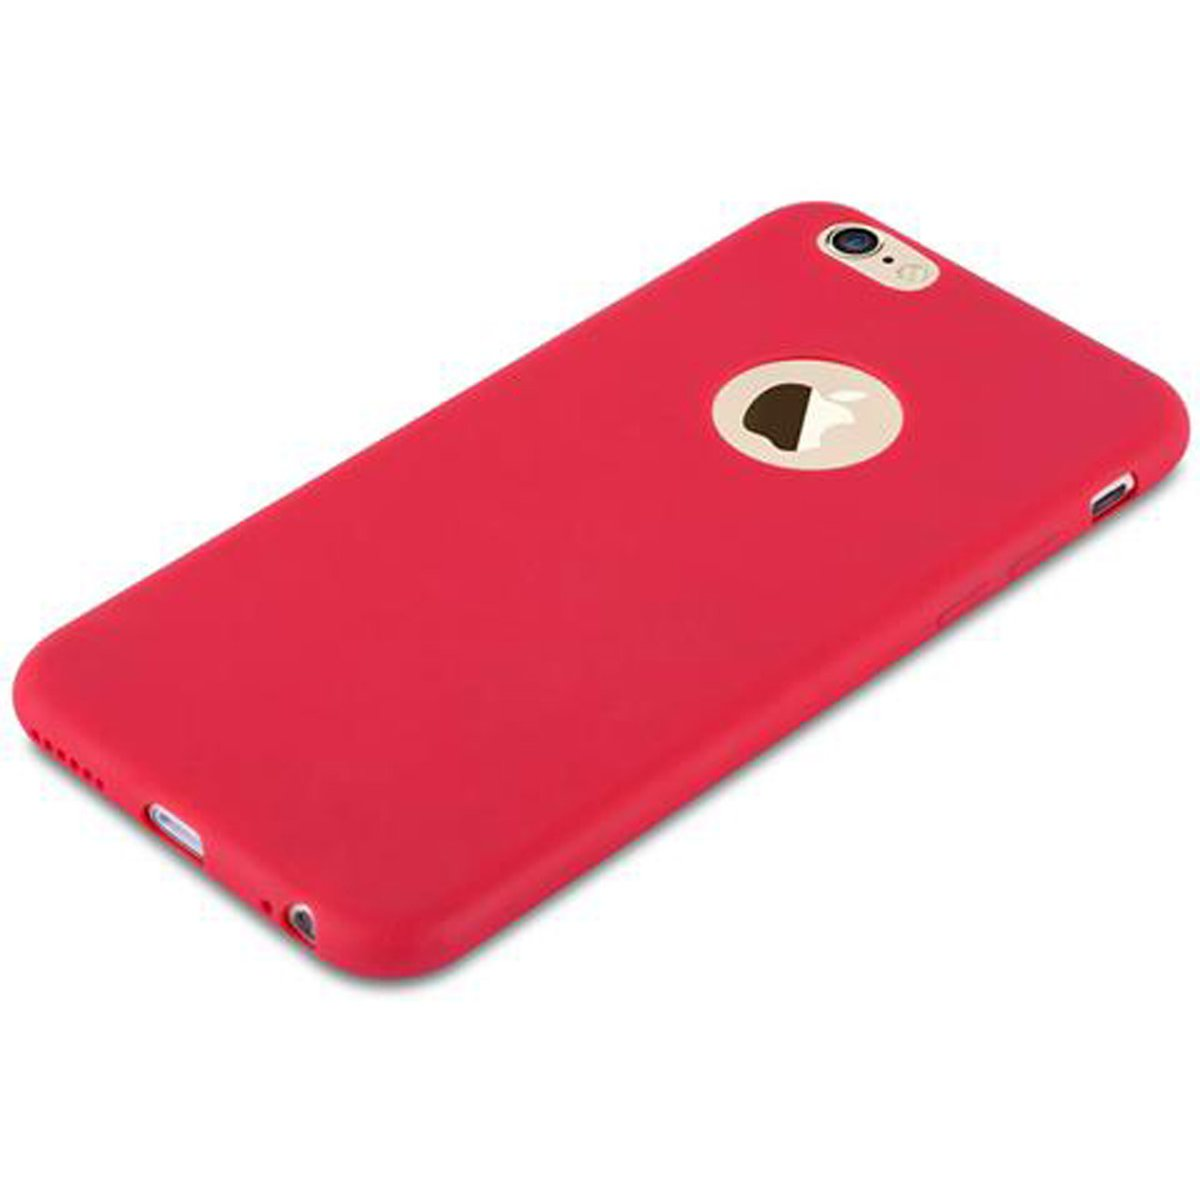 / Hülle 6S, 6 Backcover, Style, iPhone CANDY CADORABO TPU im ROT Candy Apple,